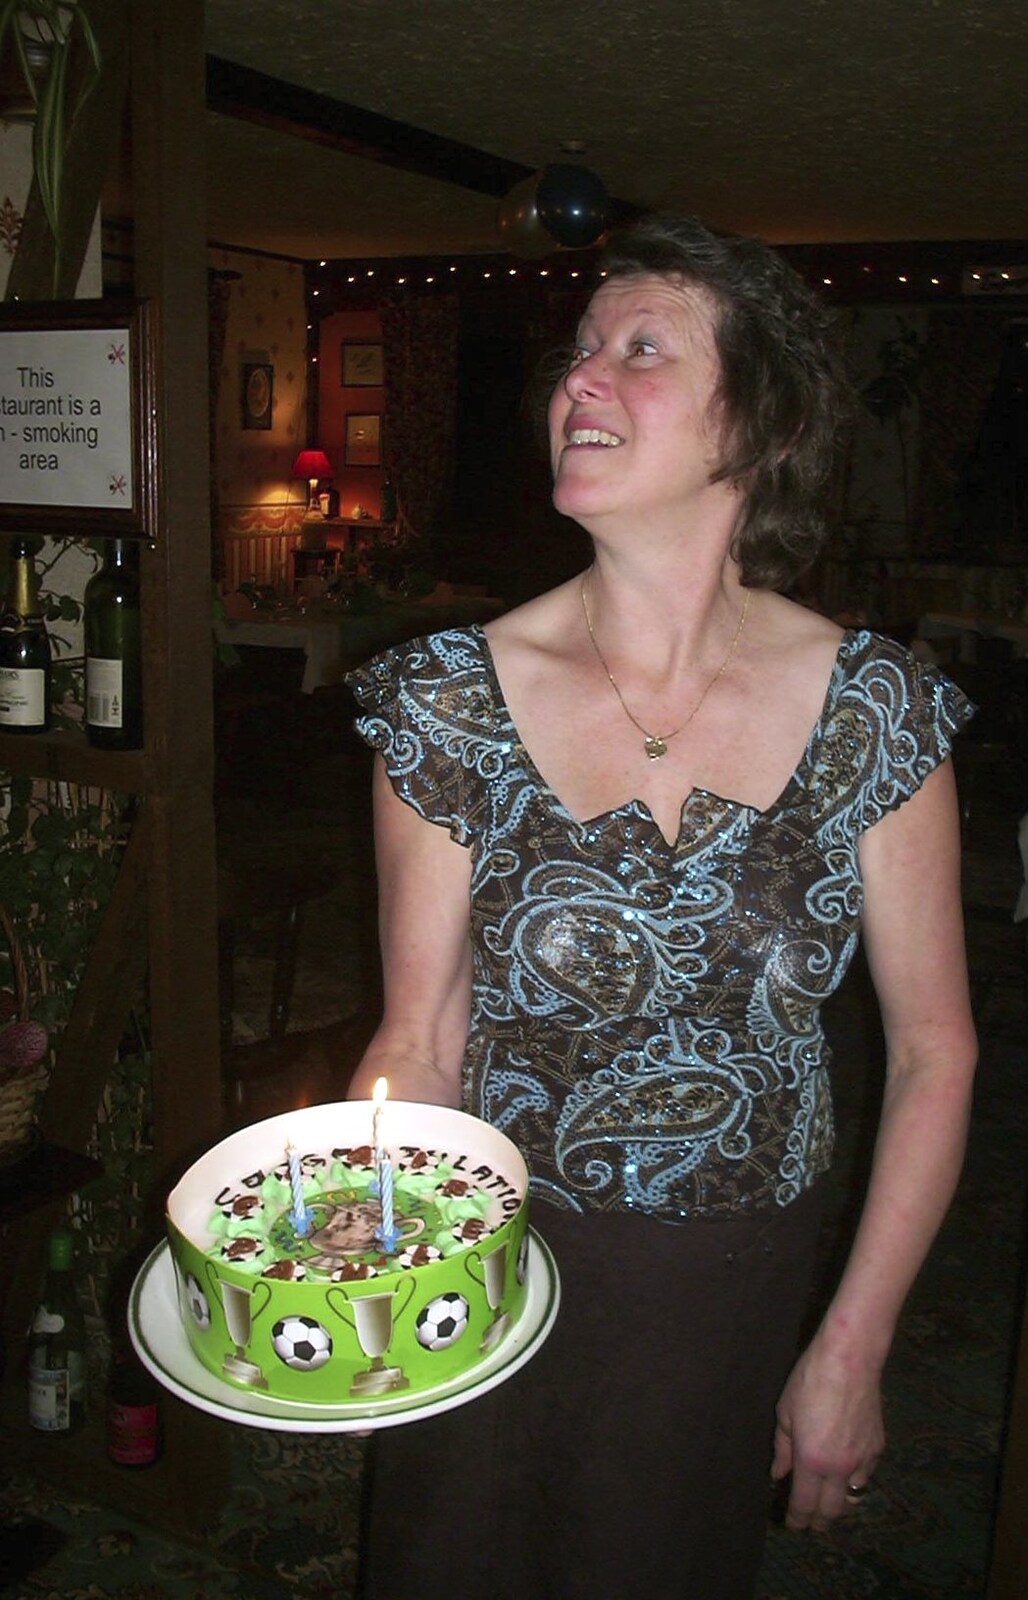 Paul and Claire's Engagement Party, Brome Swan, Suffolk - 27th March 2004: Sylvia and cake